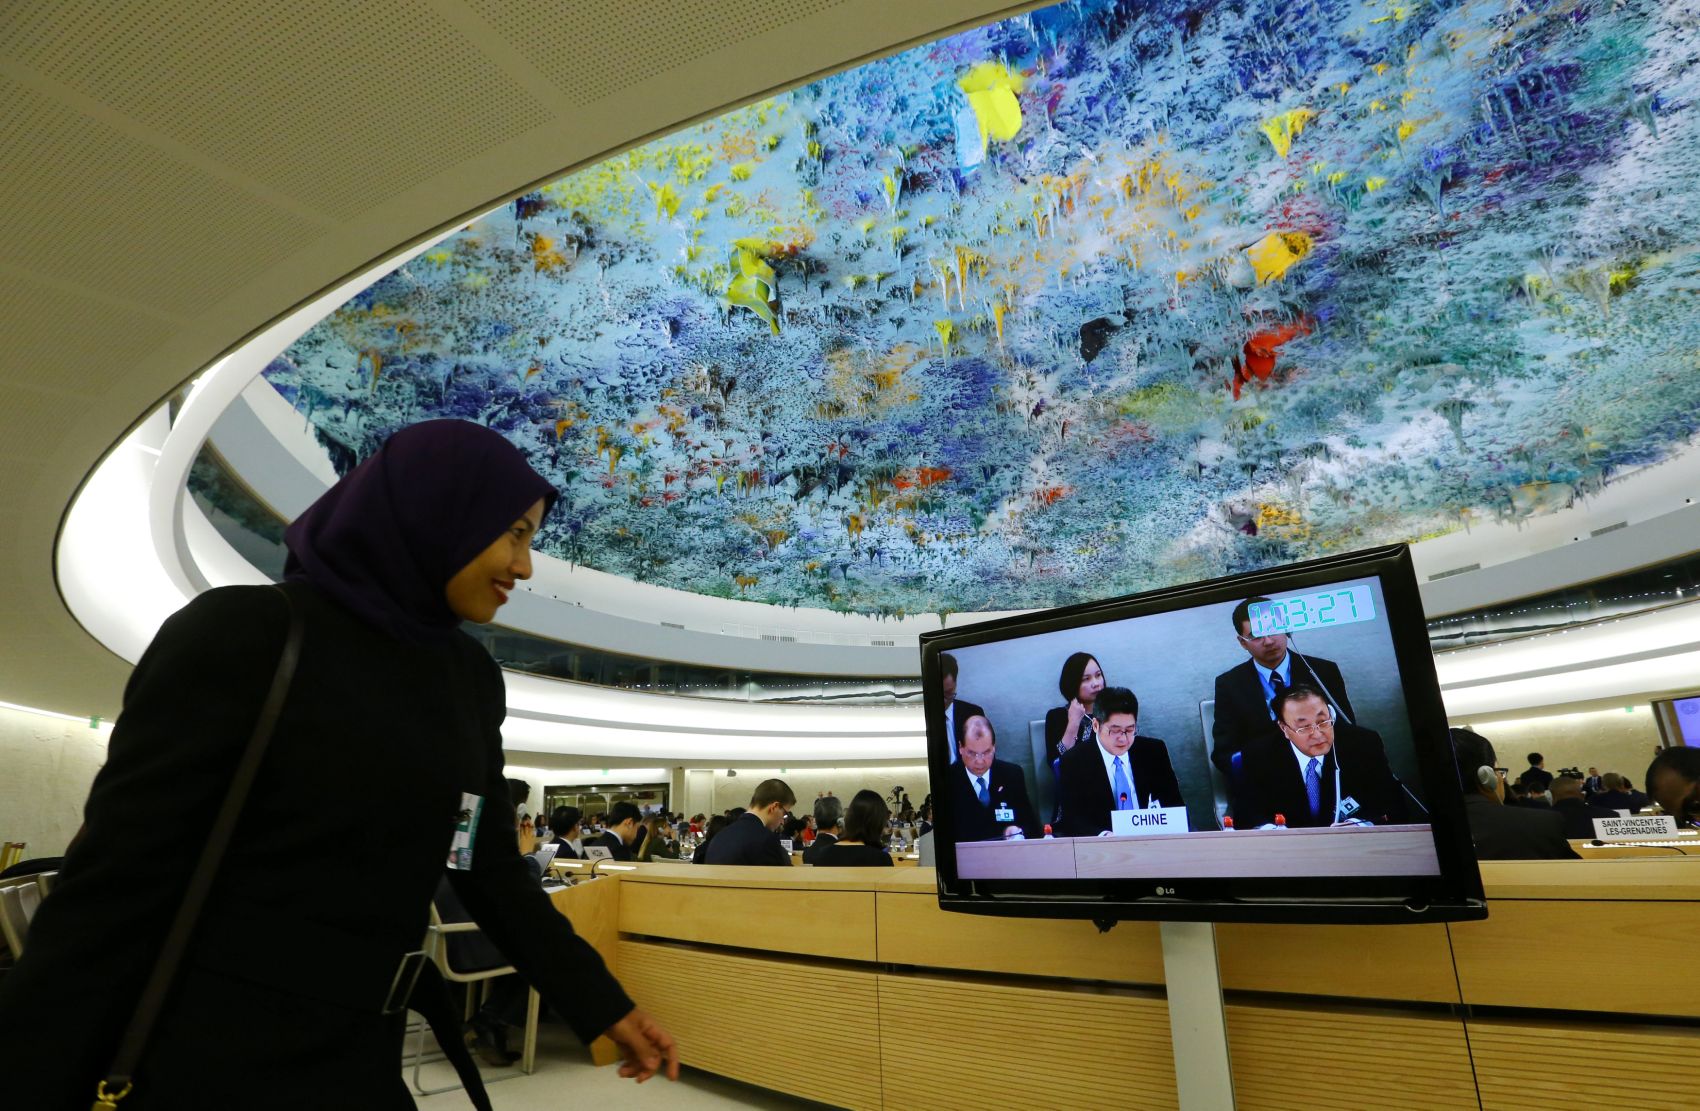 EDITORIAL | Japan Must Demand U.N. Enforced Disappearances Committee’s Retraction of Accusations